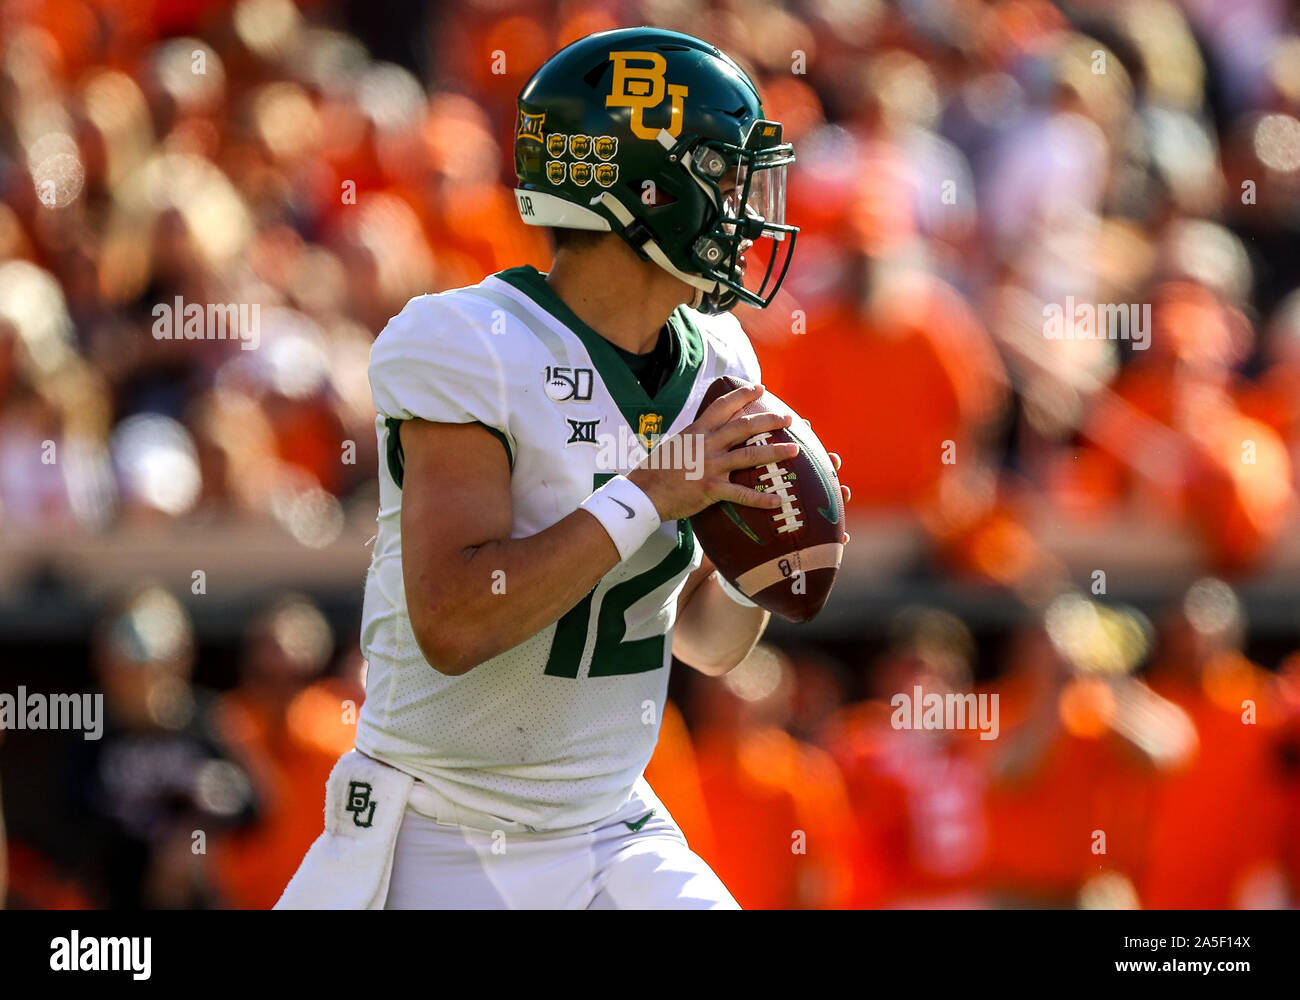 October 19, 2019: Baylor University corner back Kalon Barnes (12) during a football game between the Baylor University Bears and the Oklahoma State Cowboys at Boone Pickens Stadium in Stillwater, OK. Gray Siegel/CSM Stock Photo